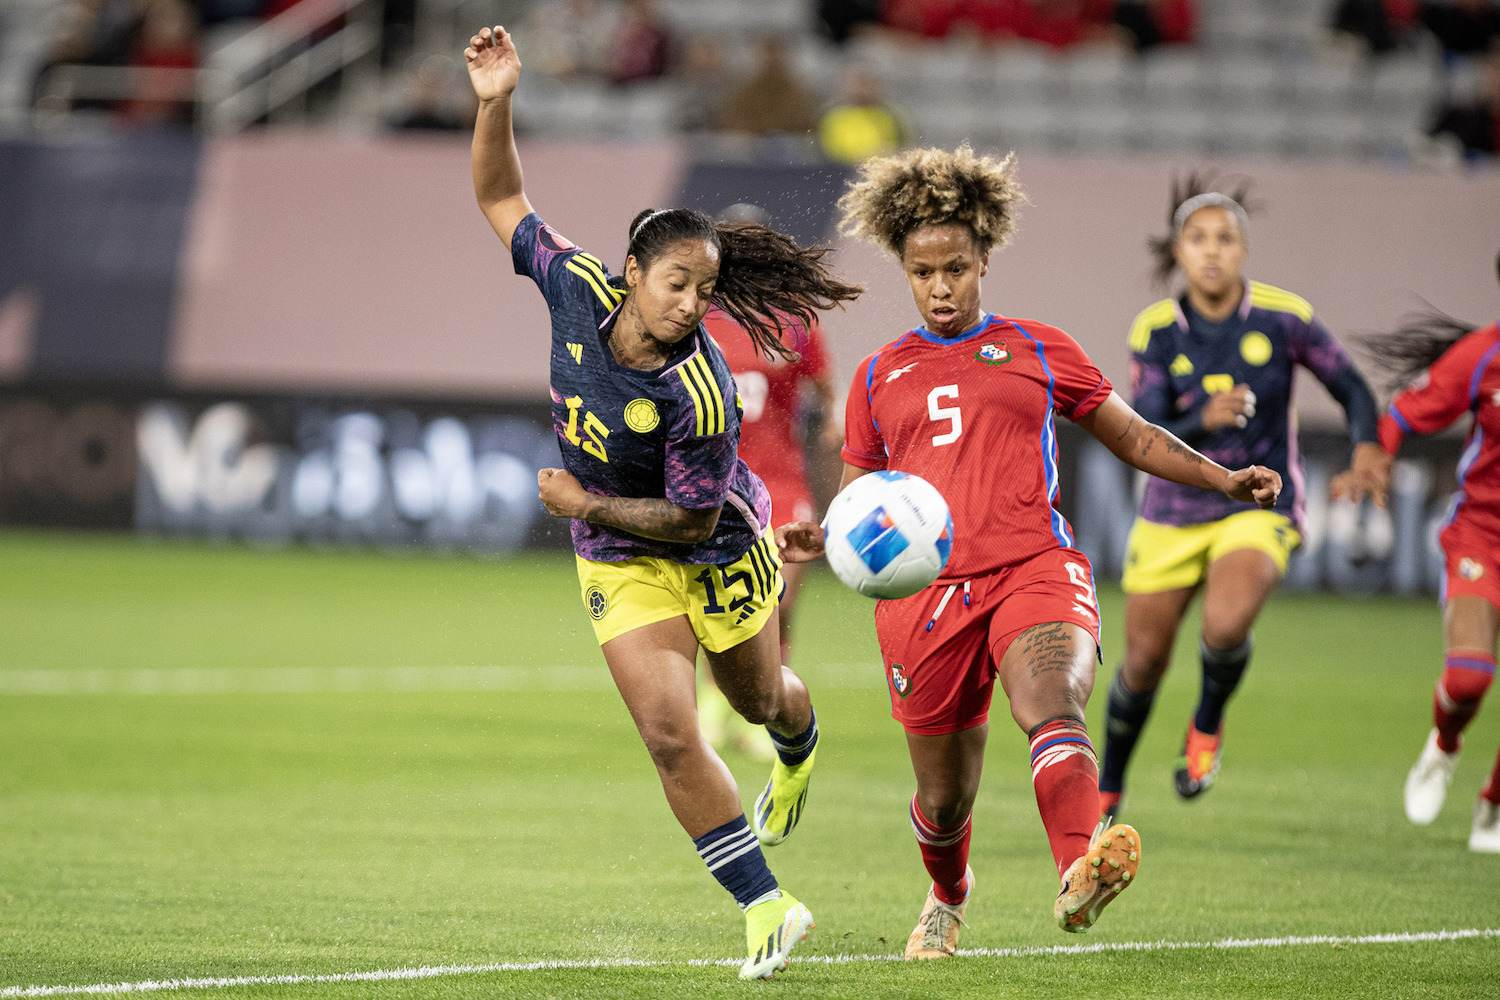 Group stage Women's Concacaf Gold Cup soccer match between Colombia and Panama with two players fighting over the ball